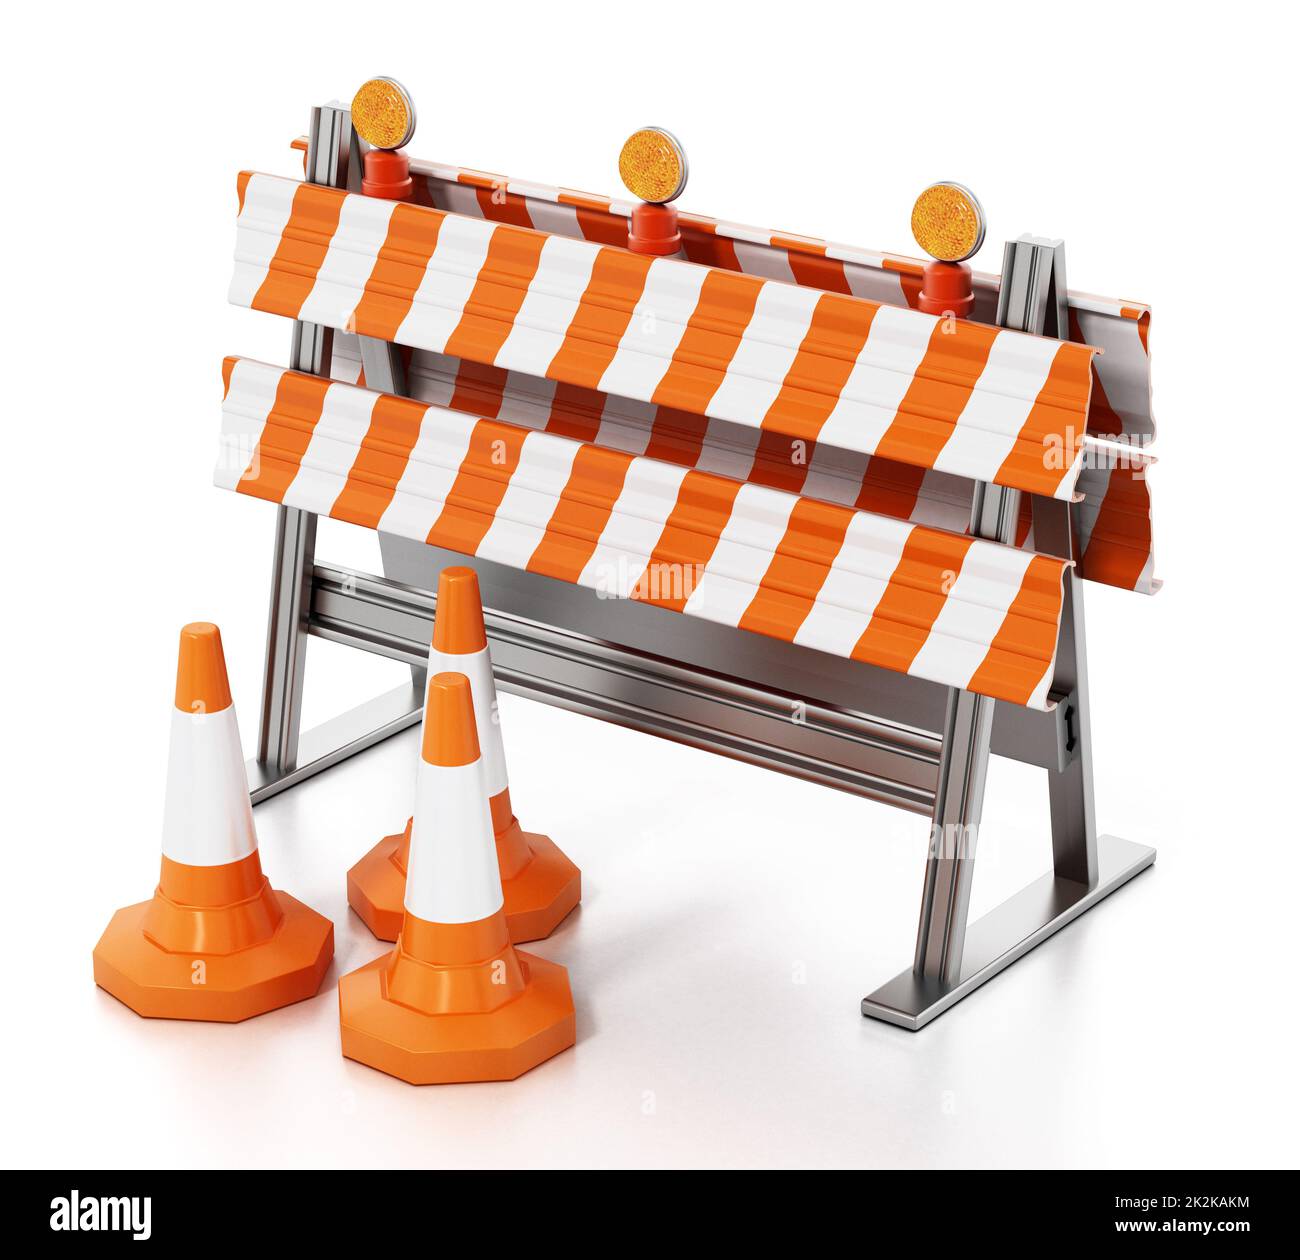 Road block with traffic cones isolated on white background. 3D illustration Stock Photo